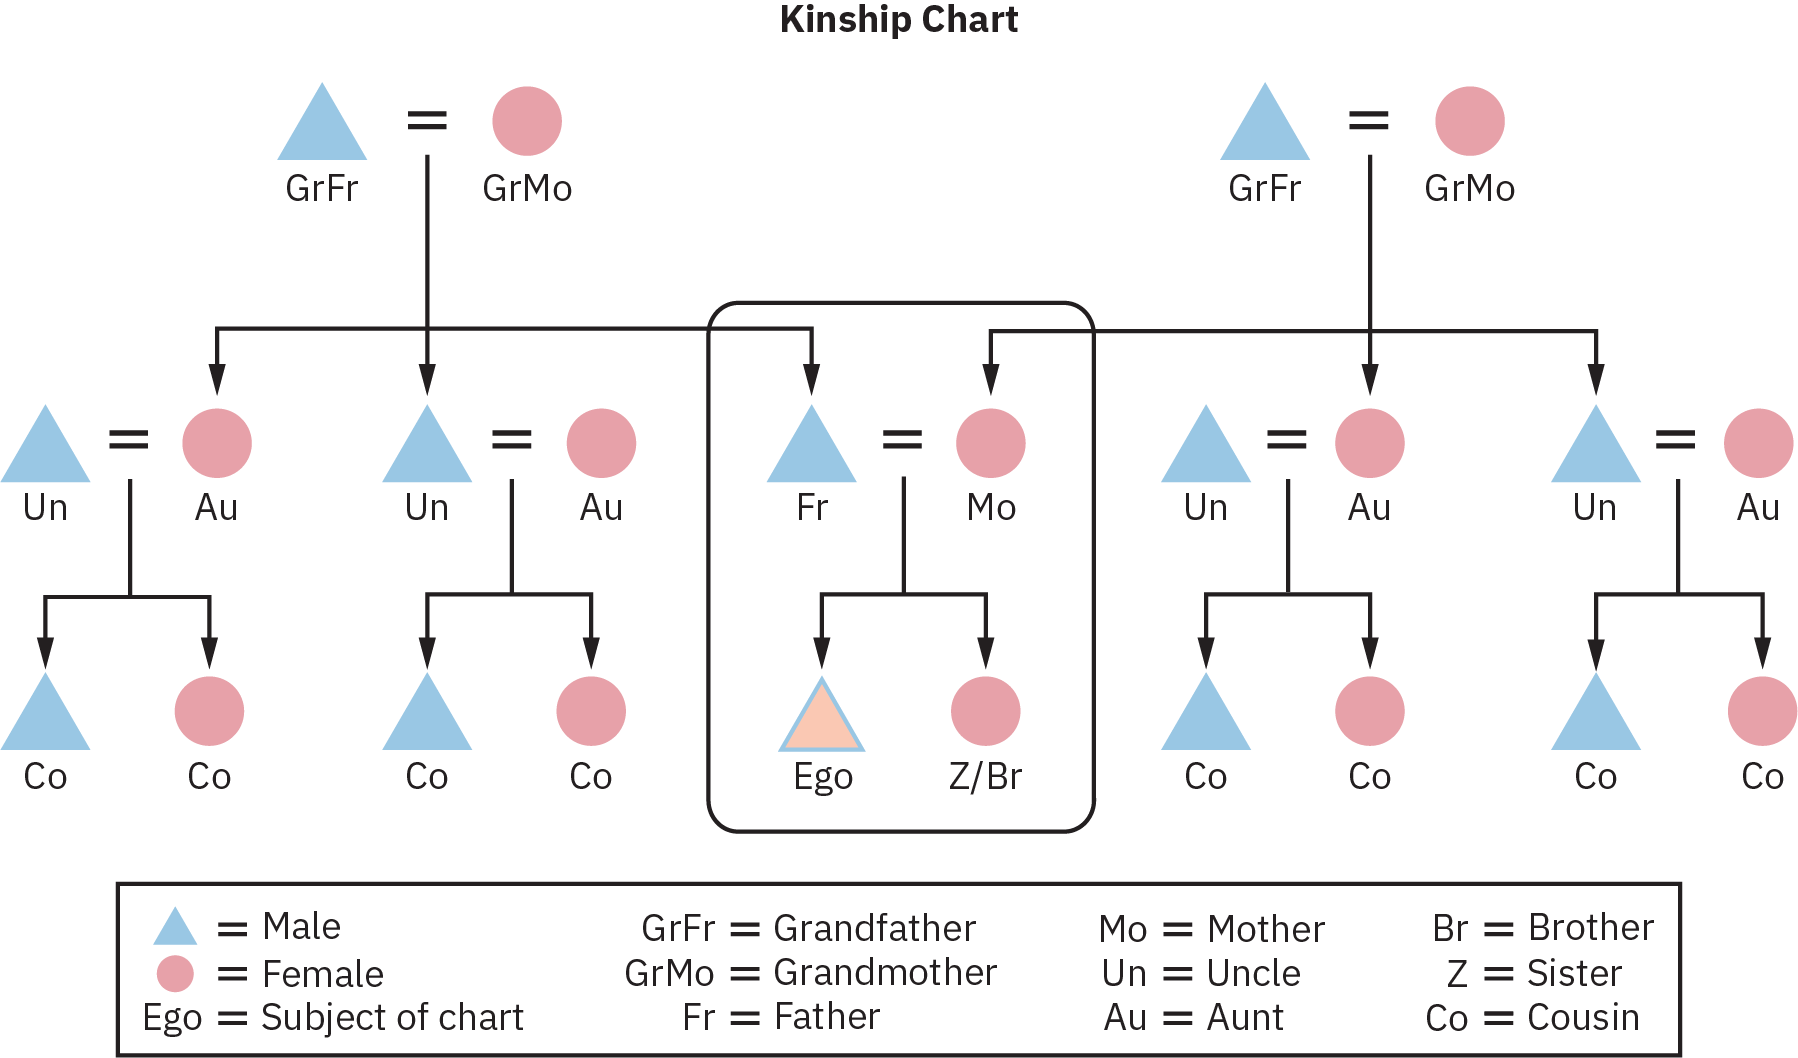 A generic kinship chart of three generations, starting from two sets of grandparents, as grandfather and grandmother respectively, their children, their respective wives, children, and a union of the male child of one family with the female child of the other family, who in turn produce the subject of the chart and a brother or sister.